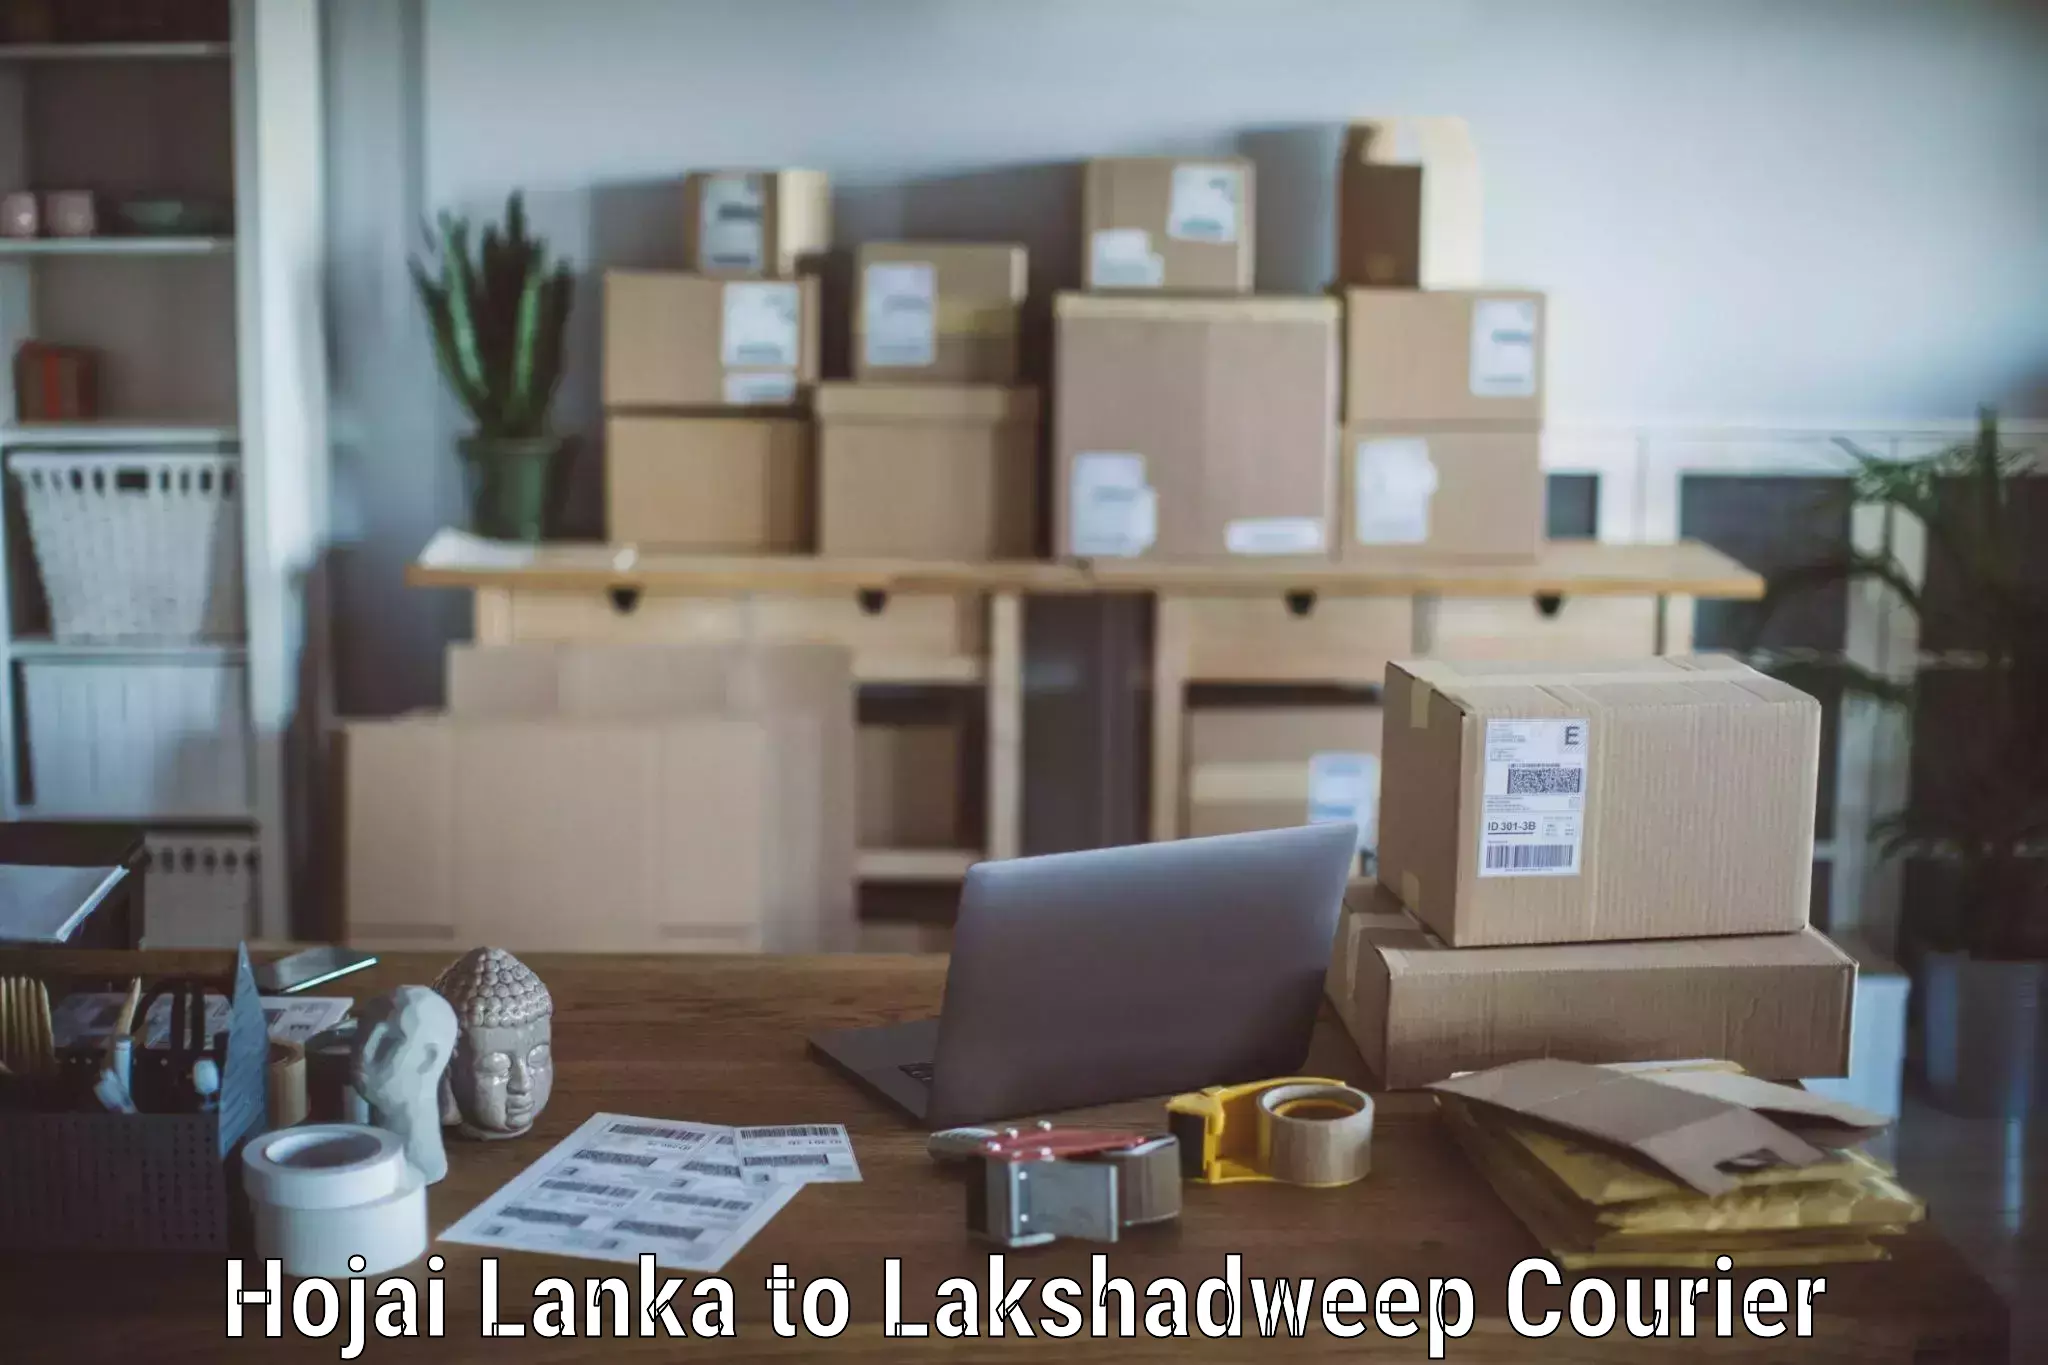 Professional home relocation in Hojai Lanka to Lakshadweep